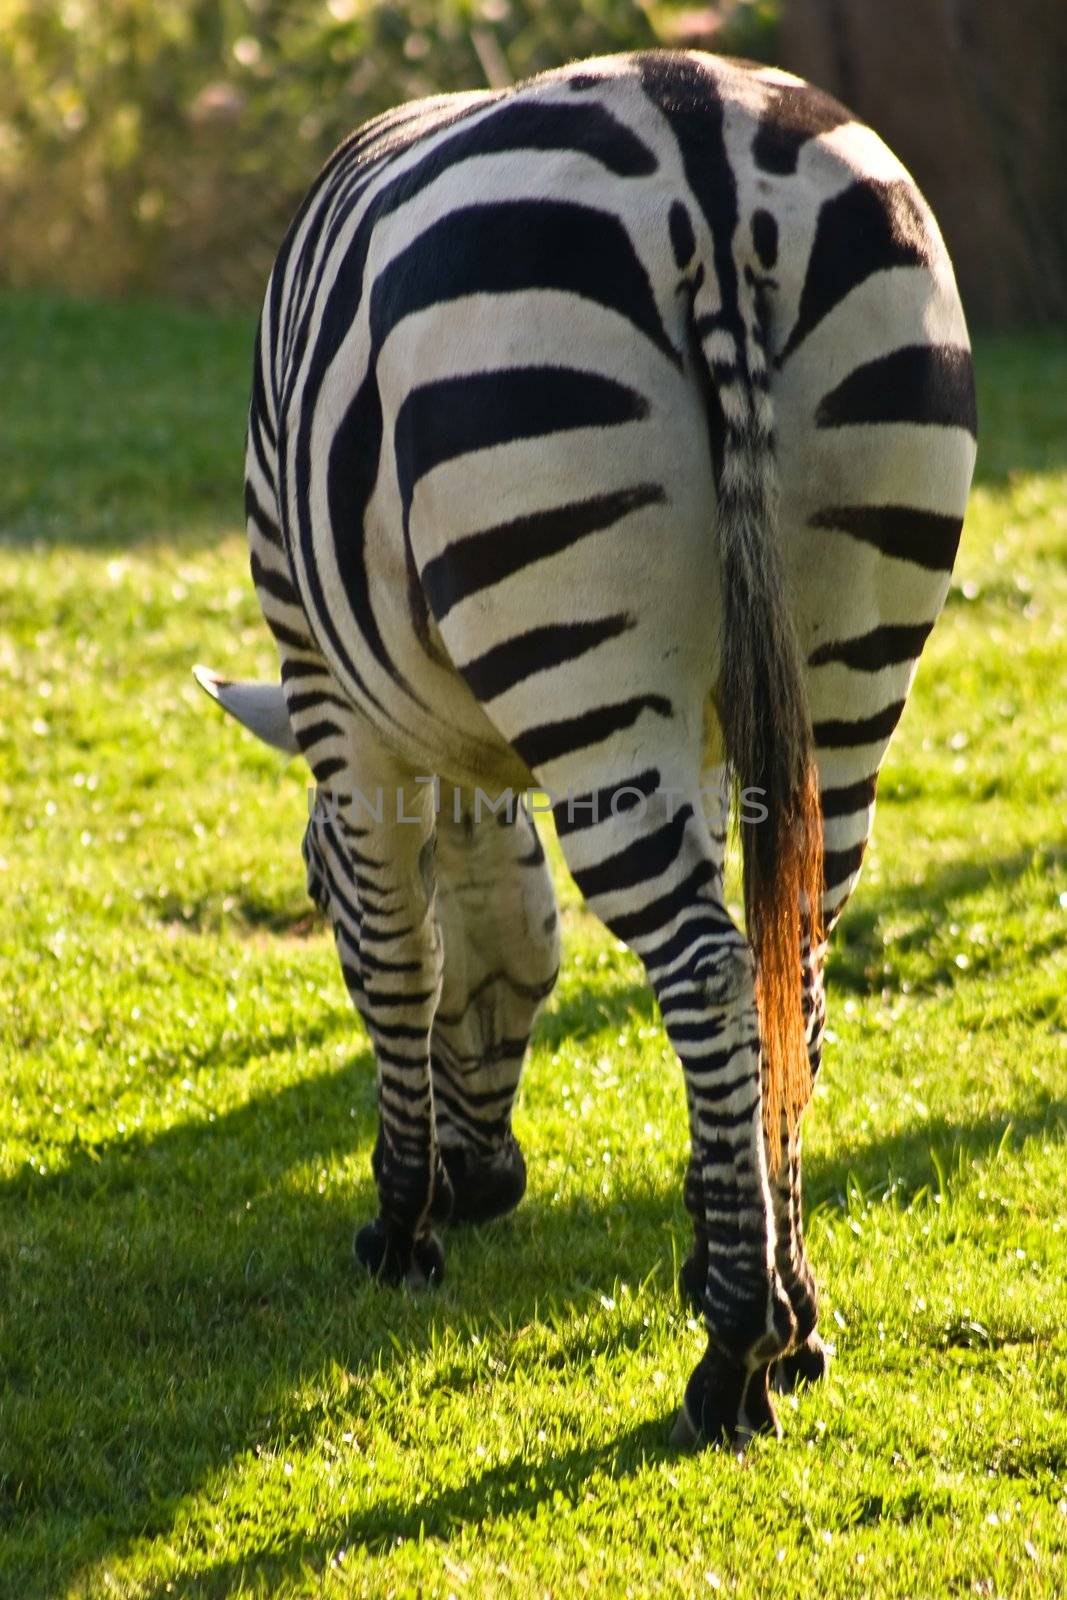 Zebras are African equids best known for their distinctive white and black stripes.